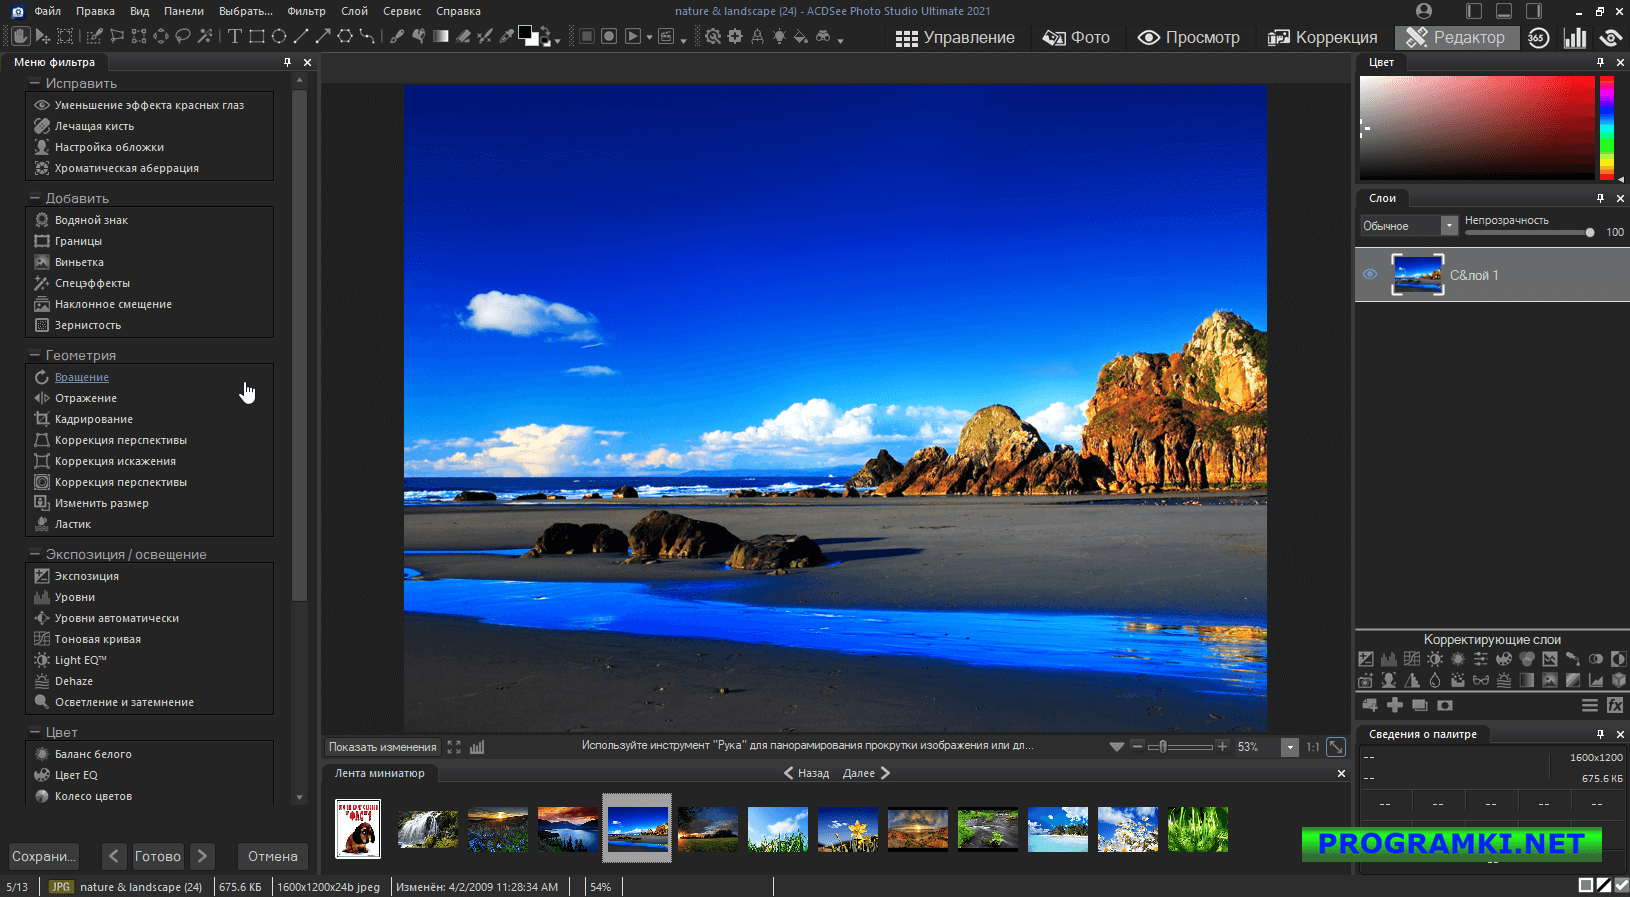 ACDSee Photo Studio 10 instal the last version for mac